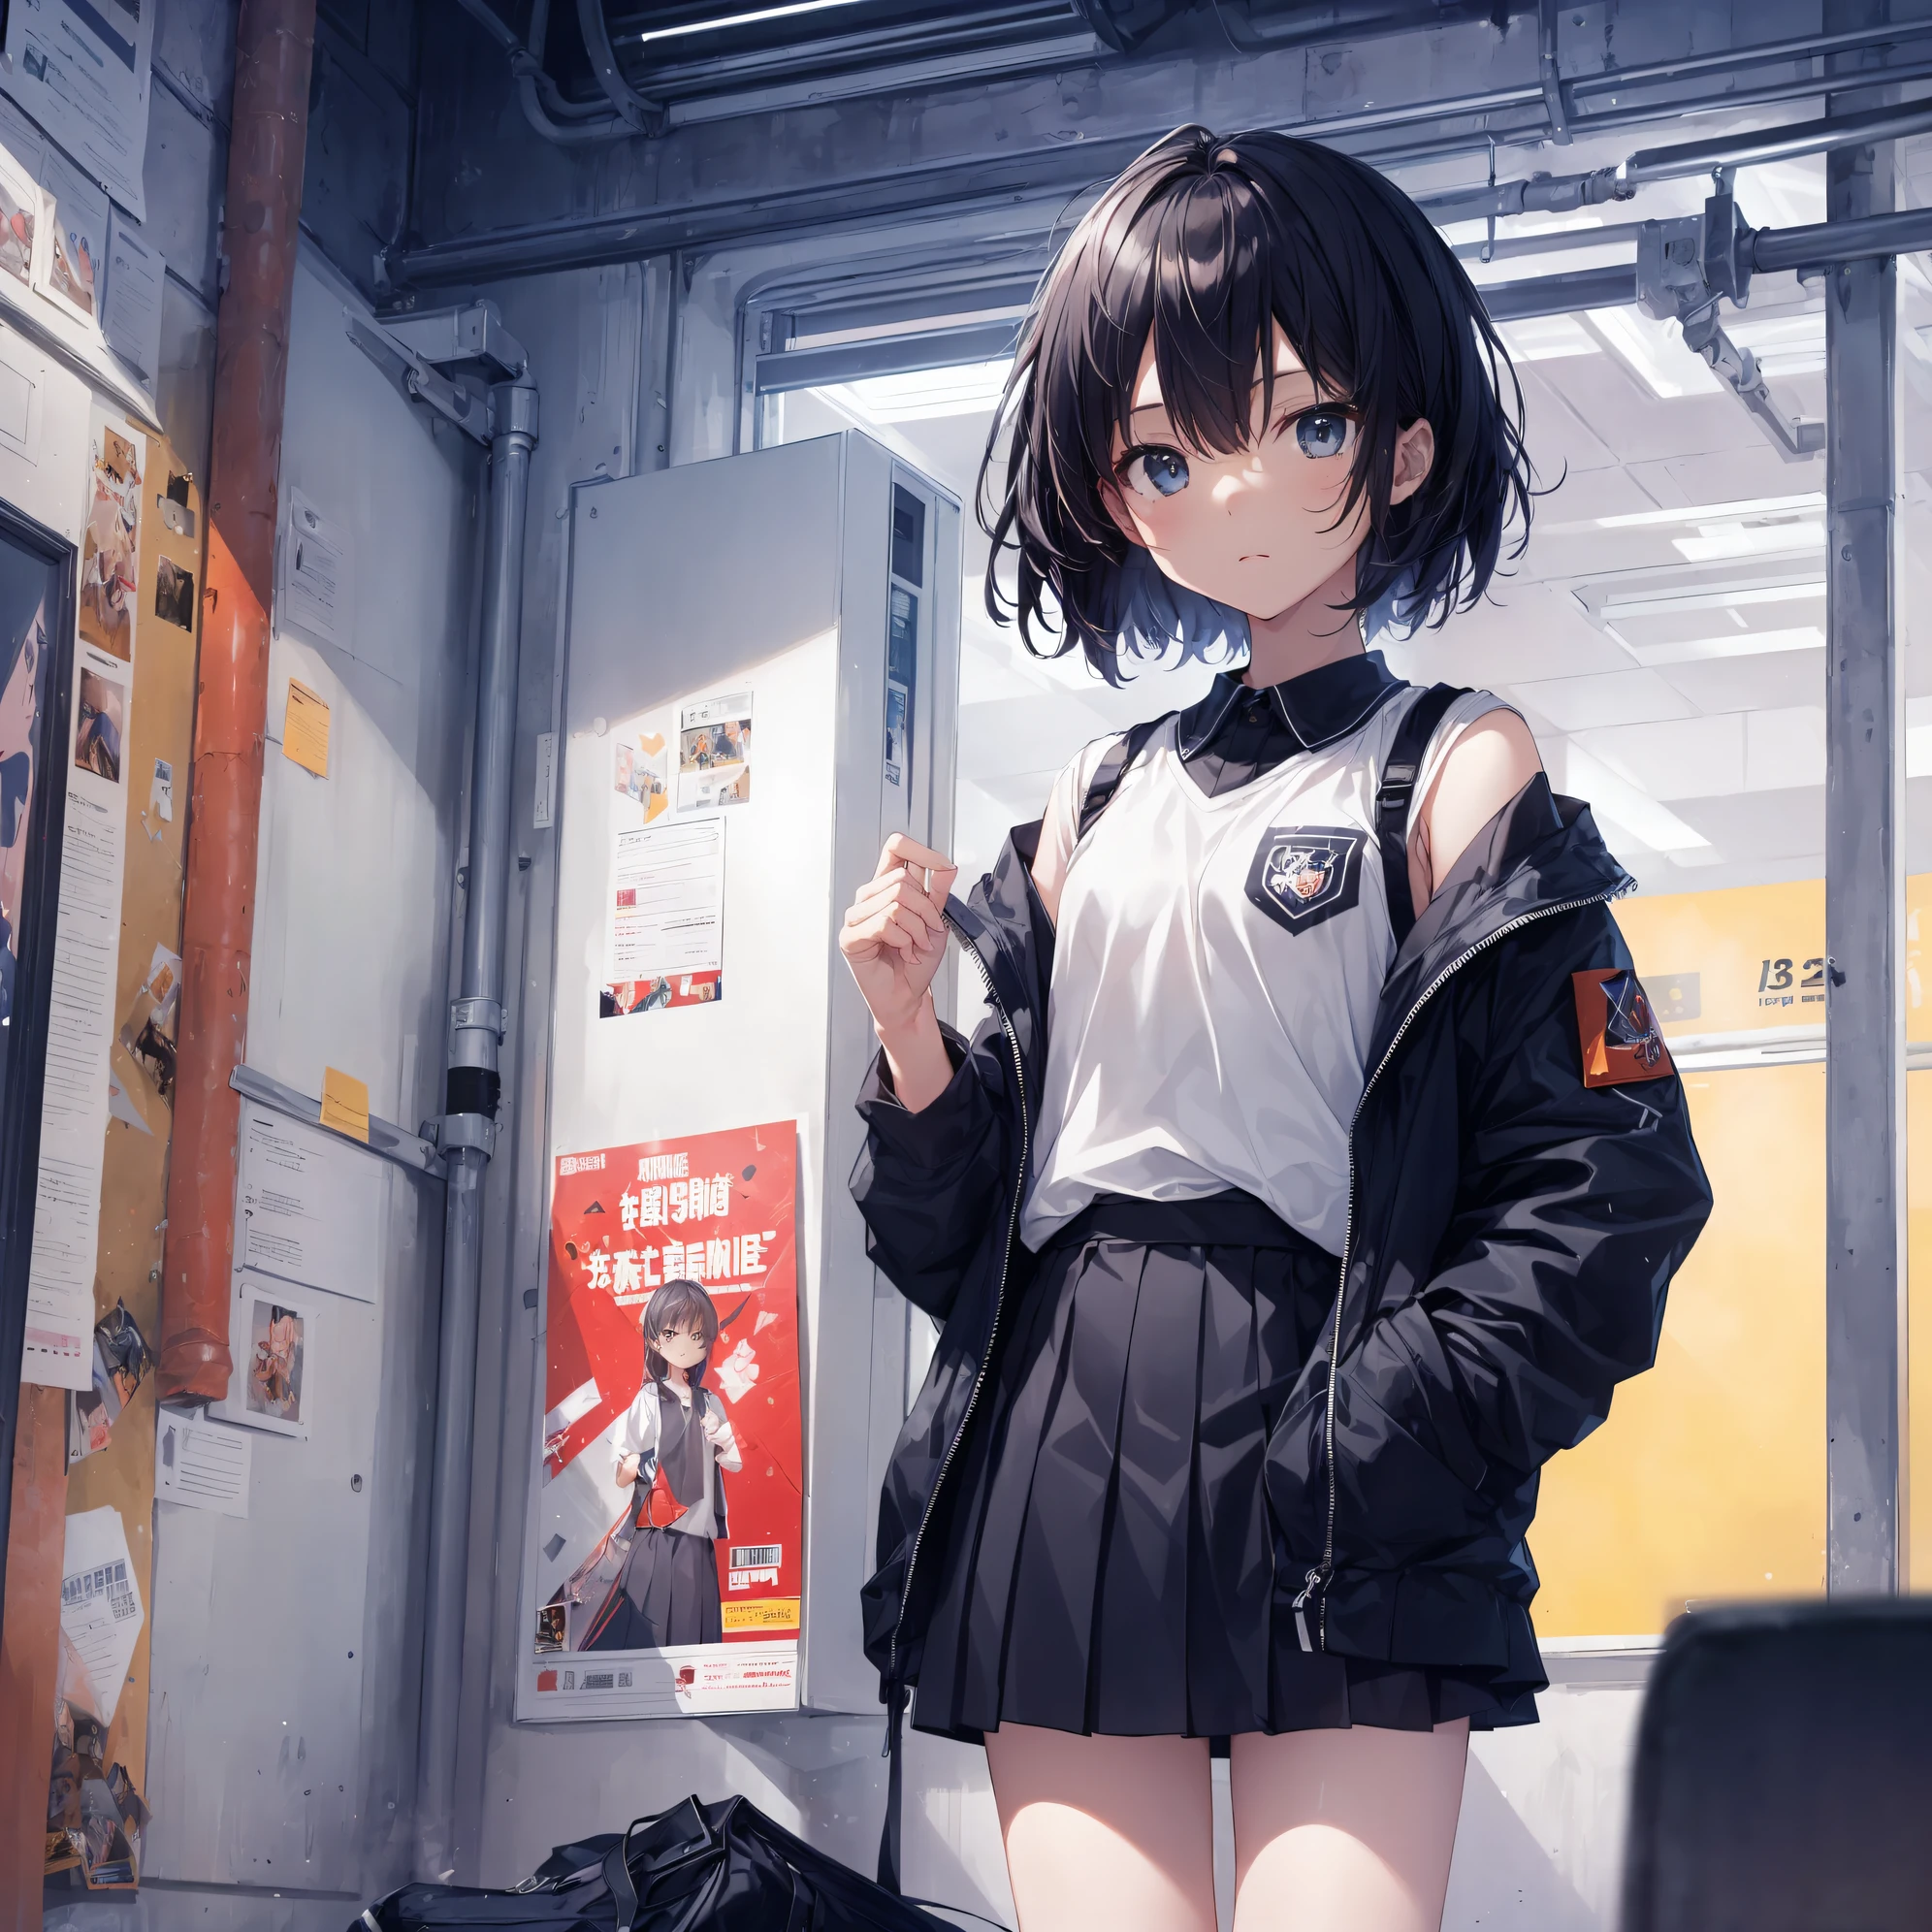 ((Top quality by Art God, Ultra-detailed, High resolution,super detailed skin,anime moe art style,Best Anime 8K Konachan Wallpapers,Pixiv Contest Winner,Perfect Anatomy)),BREAK, (Draw a girl sleepily walking to school. ),BREAK, 1girl is a cool beautiful girl, (Solo,,,13years:1.3),a junior high school student, Androgynous attraction, (Center part very short hair),hair messy, Forehead, Full limbs, complete fingers,flat chest, Small butt, groin, Small eyes,Beautiful detailed black eyes,Well-proportioned iris and pupils,disgusted eye, , Skirt,On the way to school. BREAK, Best lighting by famous artists, 8K, Illustration,